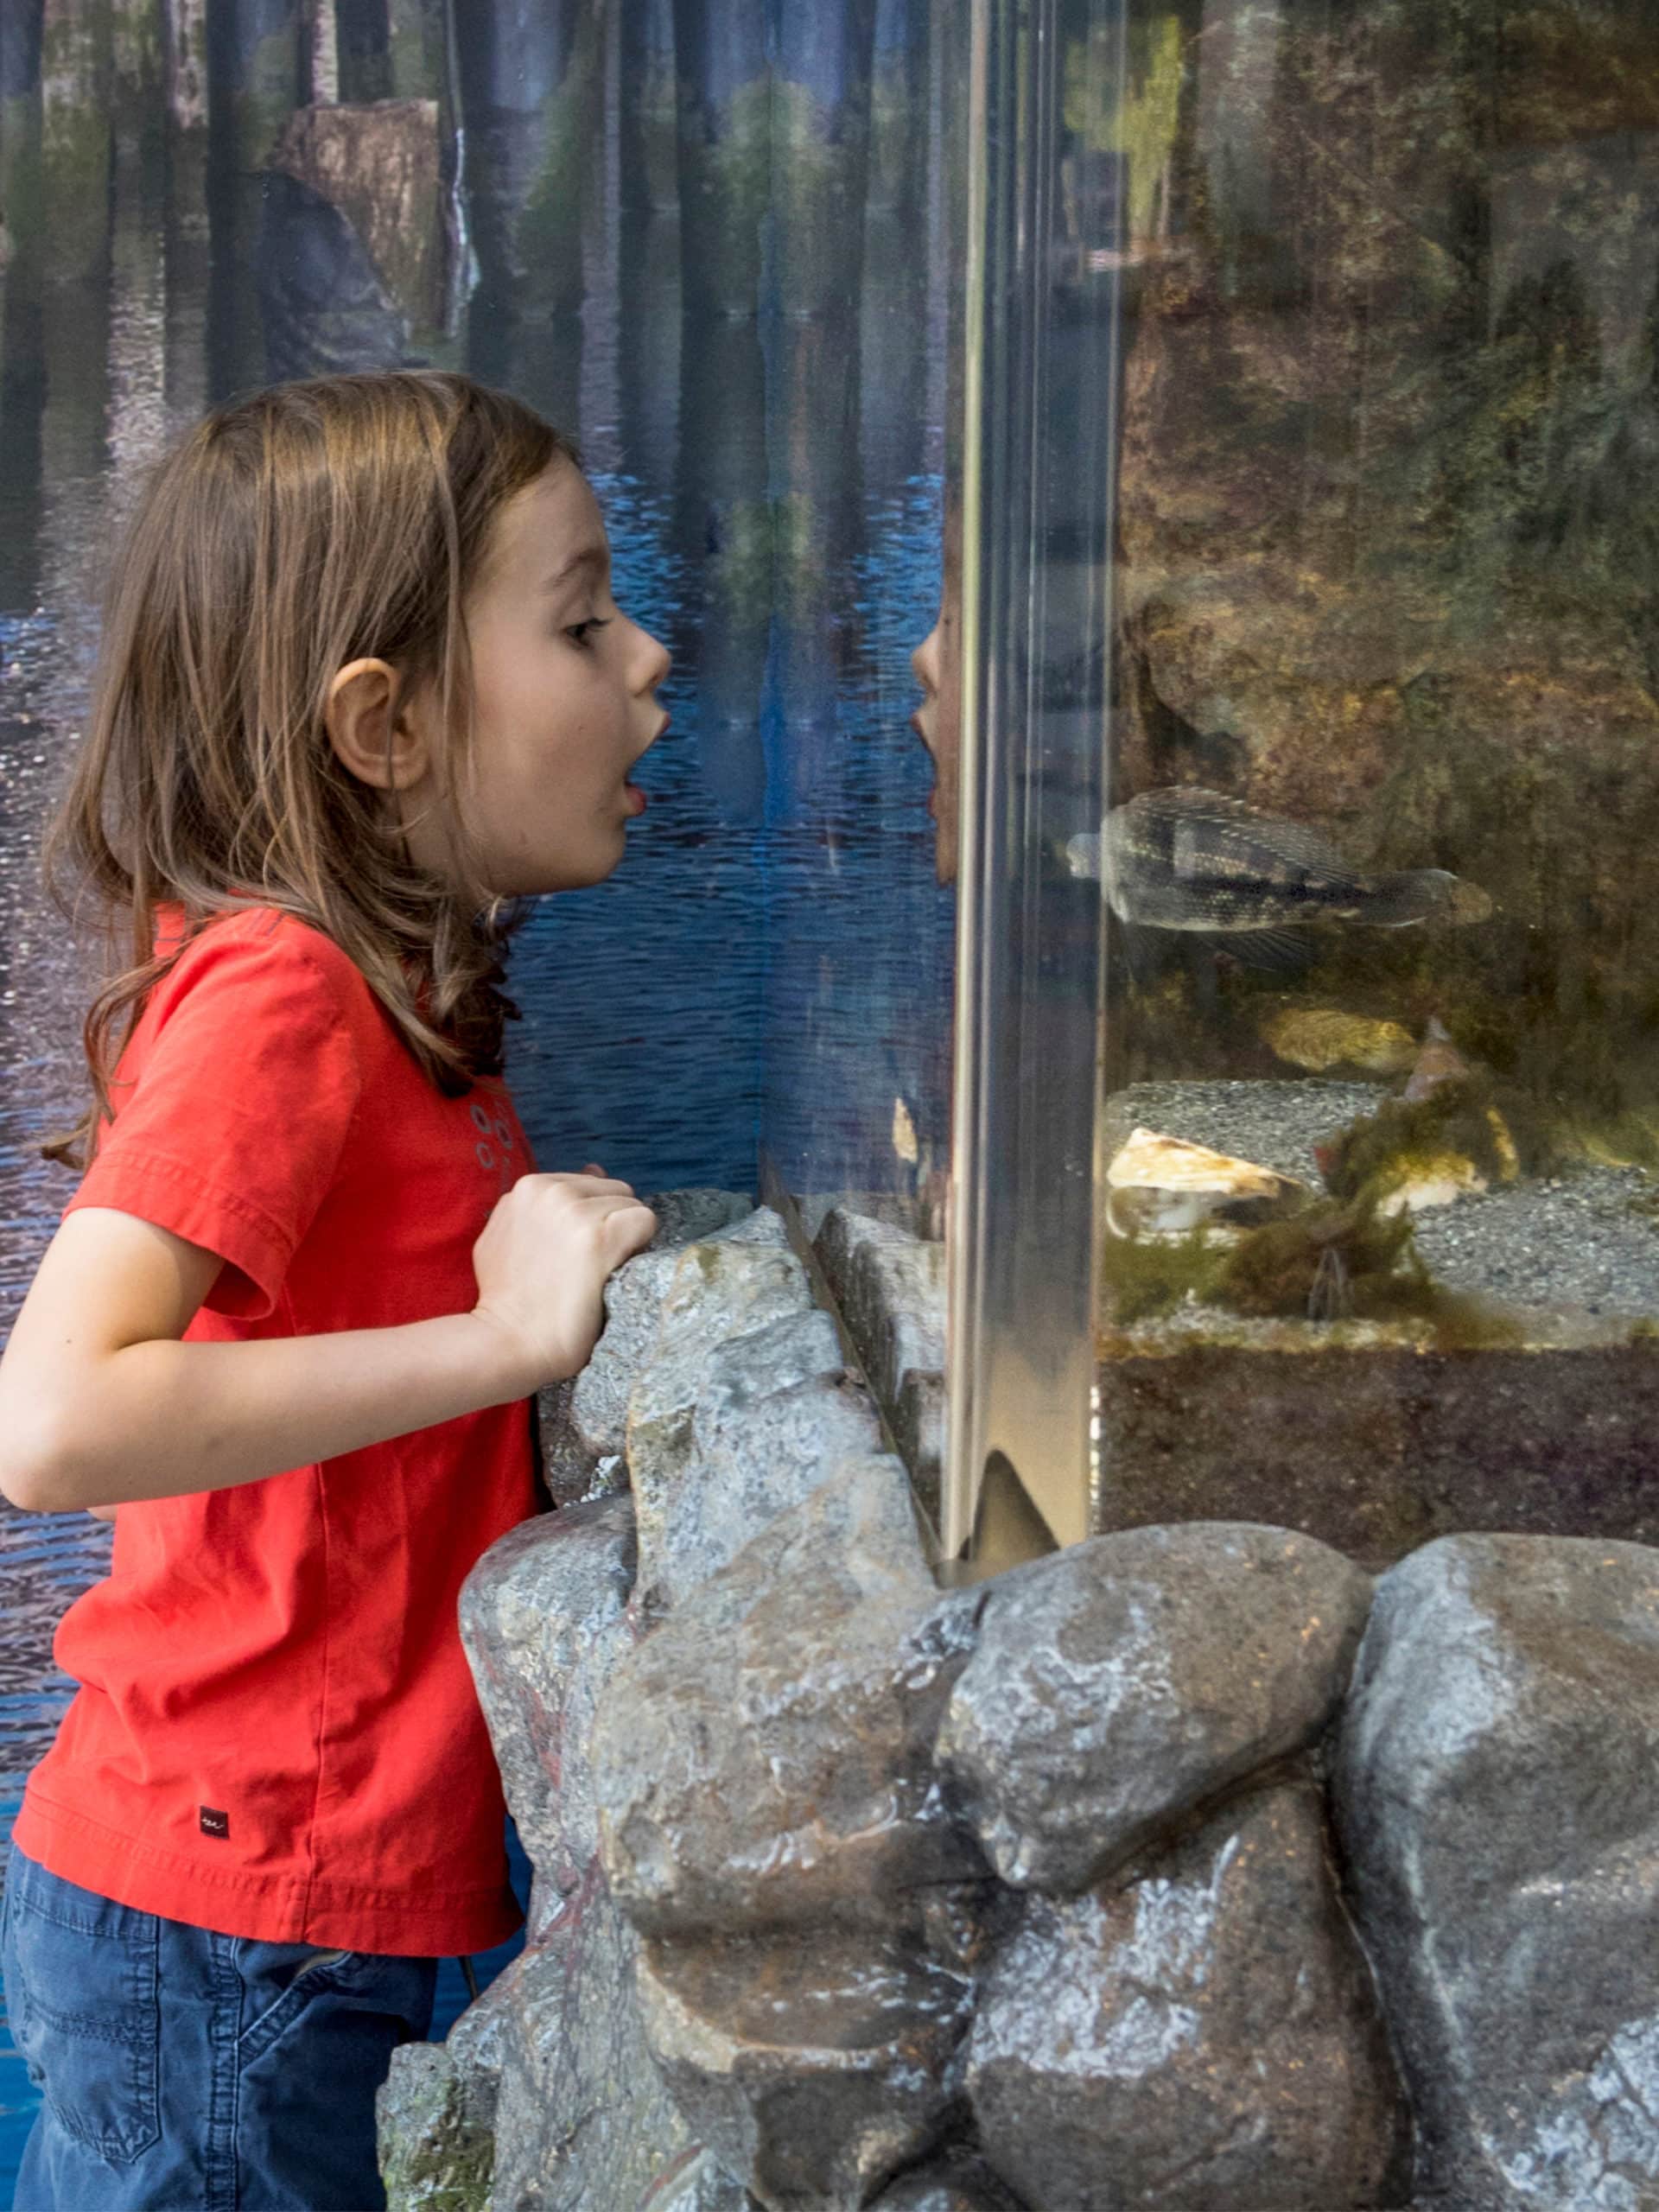 Young girl looking into fish tank.